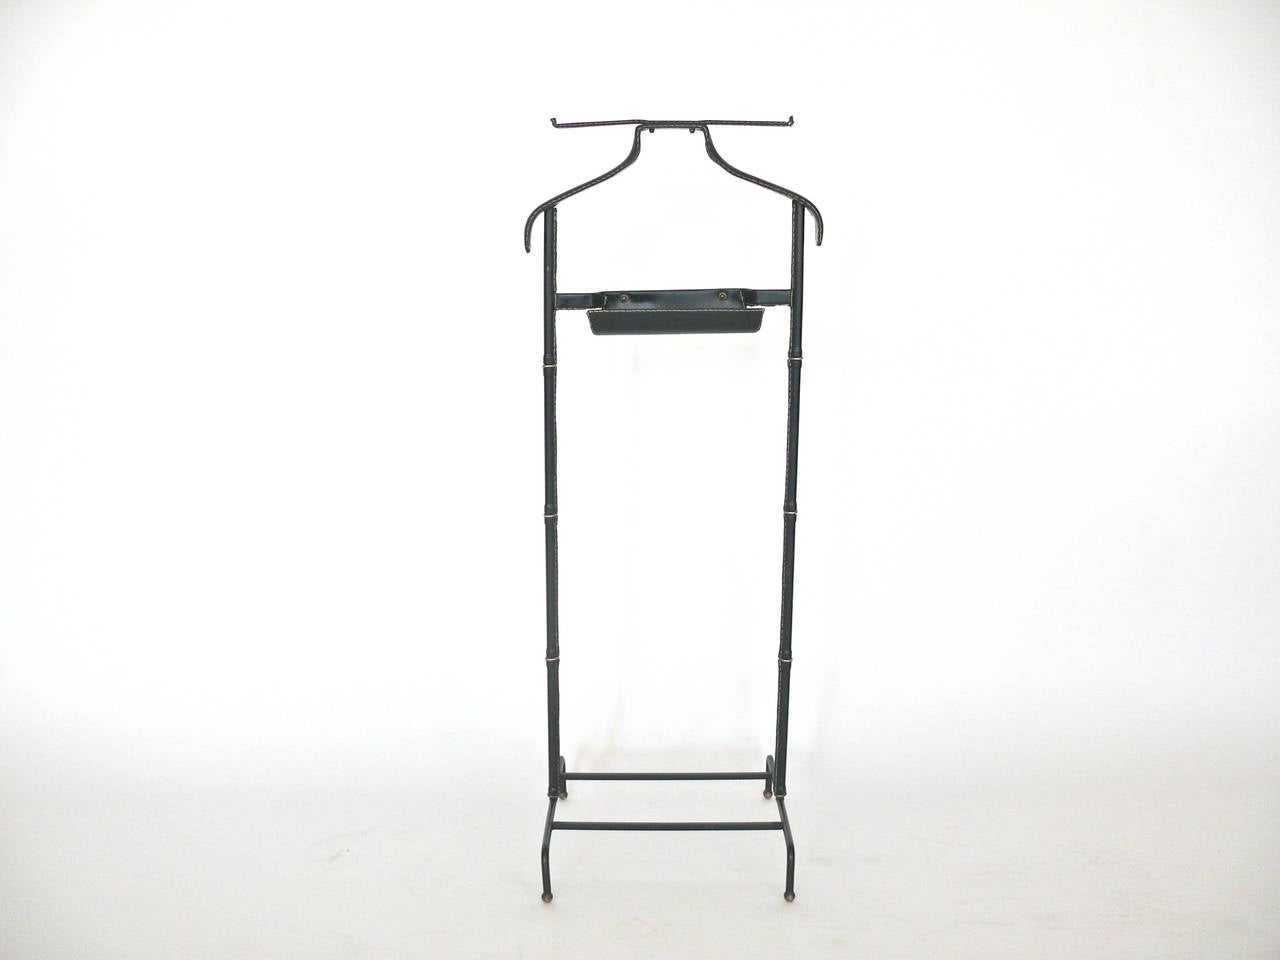 Handsome black leather valet by Jacques Adnet. Valet has coat rack and pant rack with signature contrast stitching. Valet sits atop brass ball feet. Small curved catch-all perfect for watch and cufflinks. Excellent vintage condition.